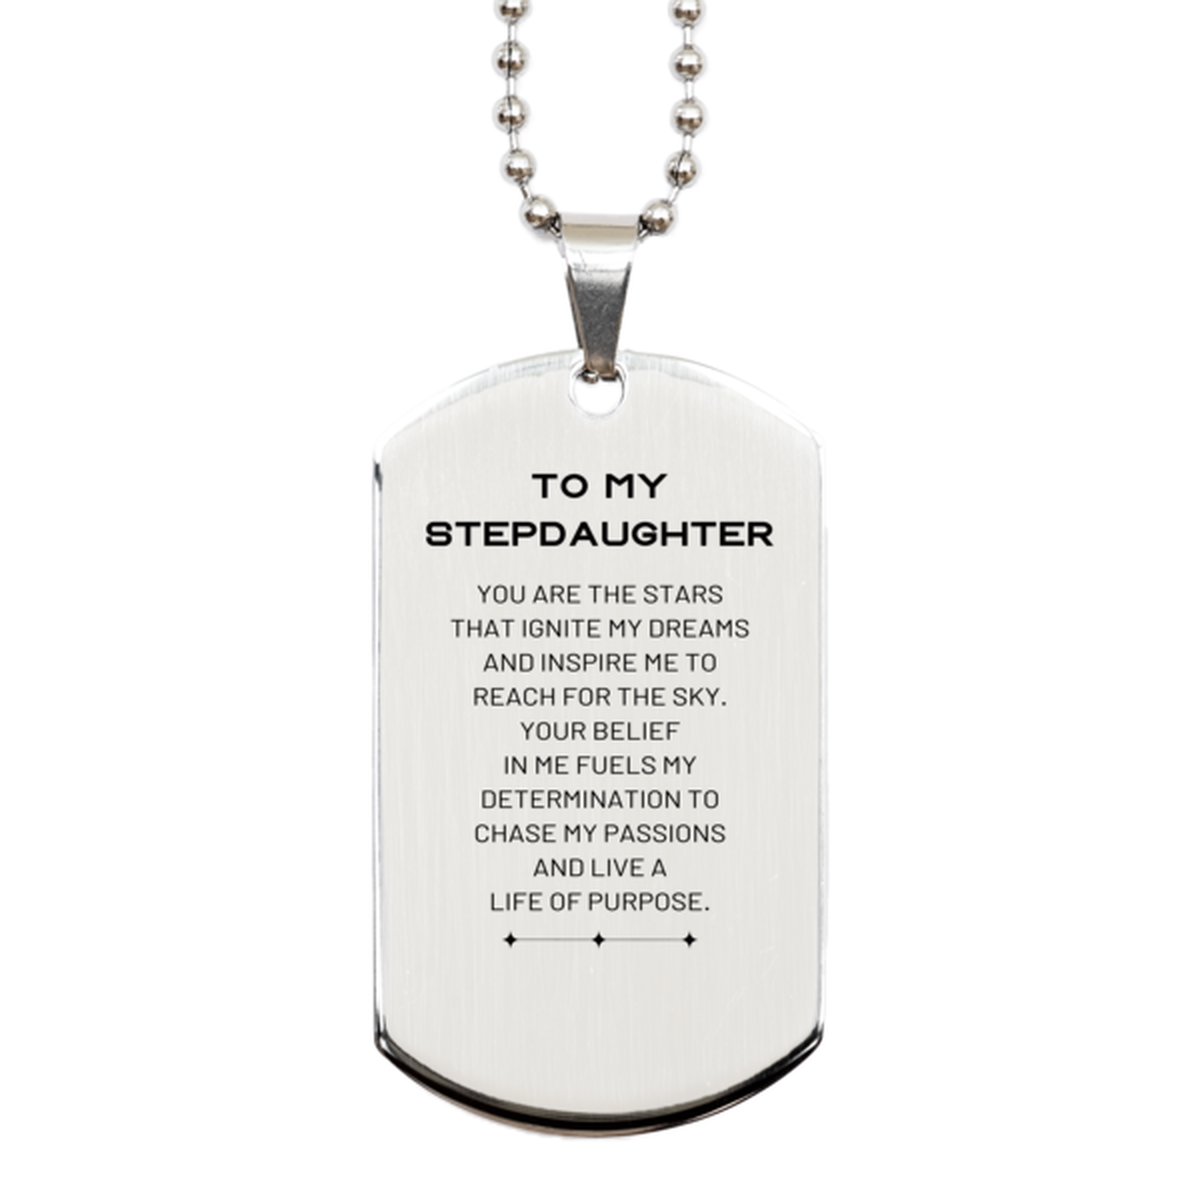 To My Stepdaughter Silver Dog Tag, You are the stars that ignite my dreams and inspire me to reach for the sky, Birthday Unique Gifts For Stepdaughter, Thank You Gifts For Stepdaughter